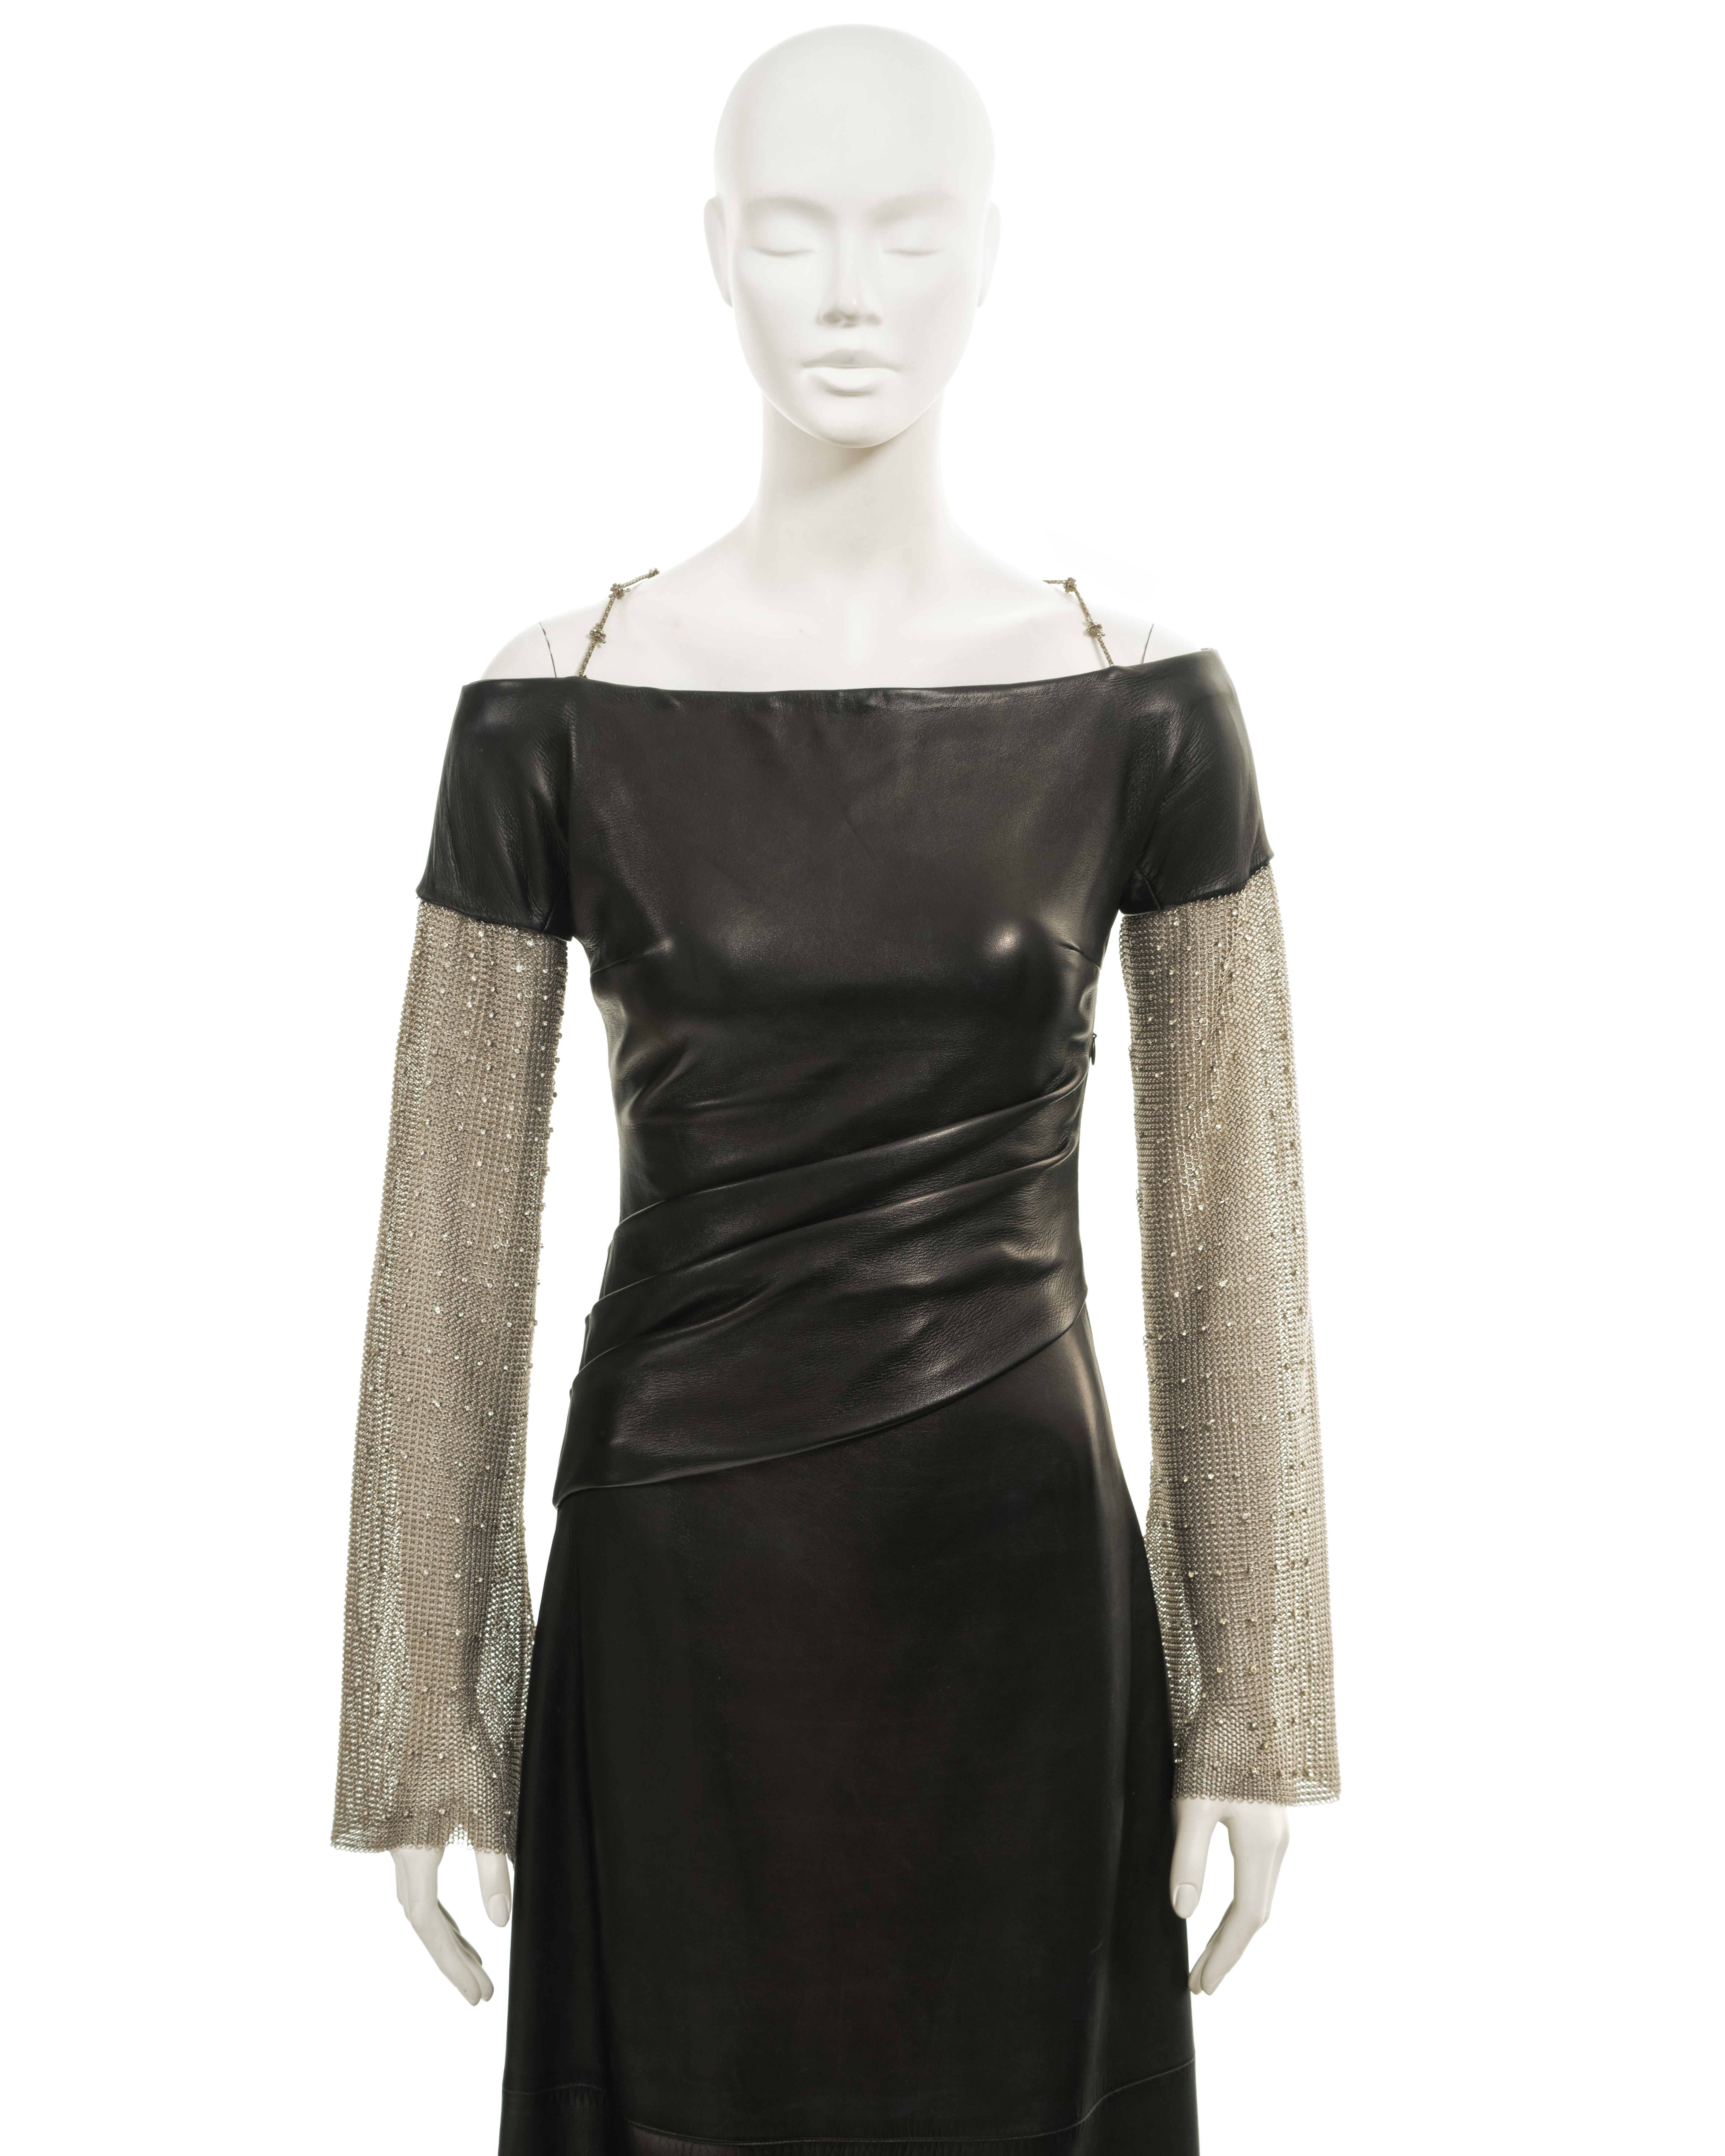 Women's Gianni Versace black leather evening dress with chainmail sleeves, fw 1998